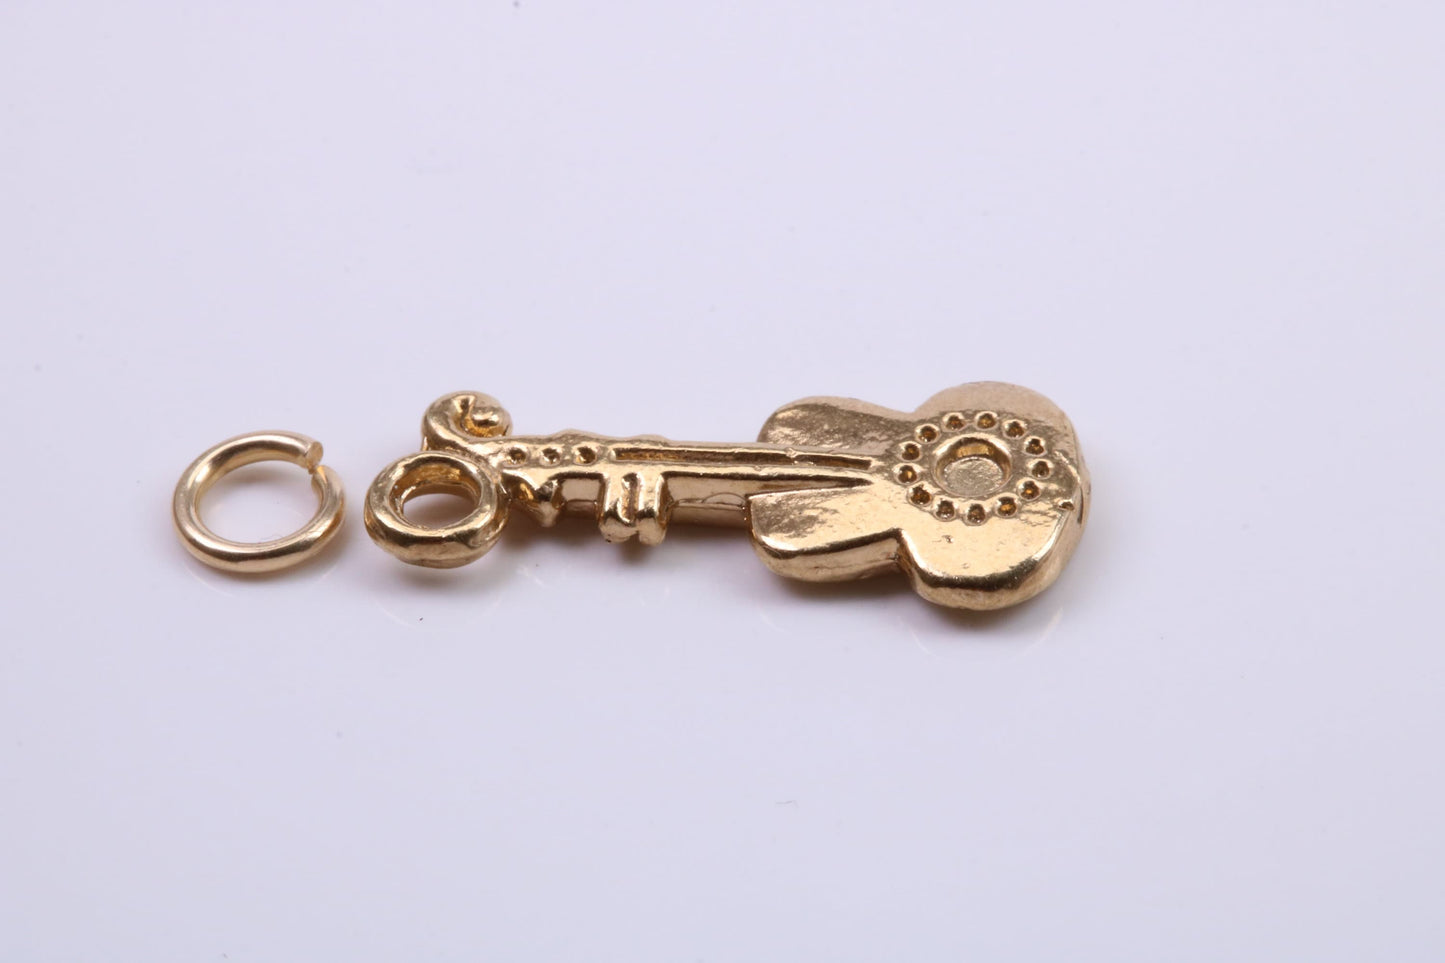 Guitar Charm, Traditional Charm, Made from Solid 9ct Yellow Gold, British Hallmarked, Complete with Attachment Link